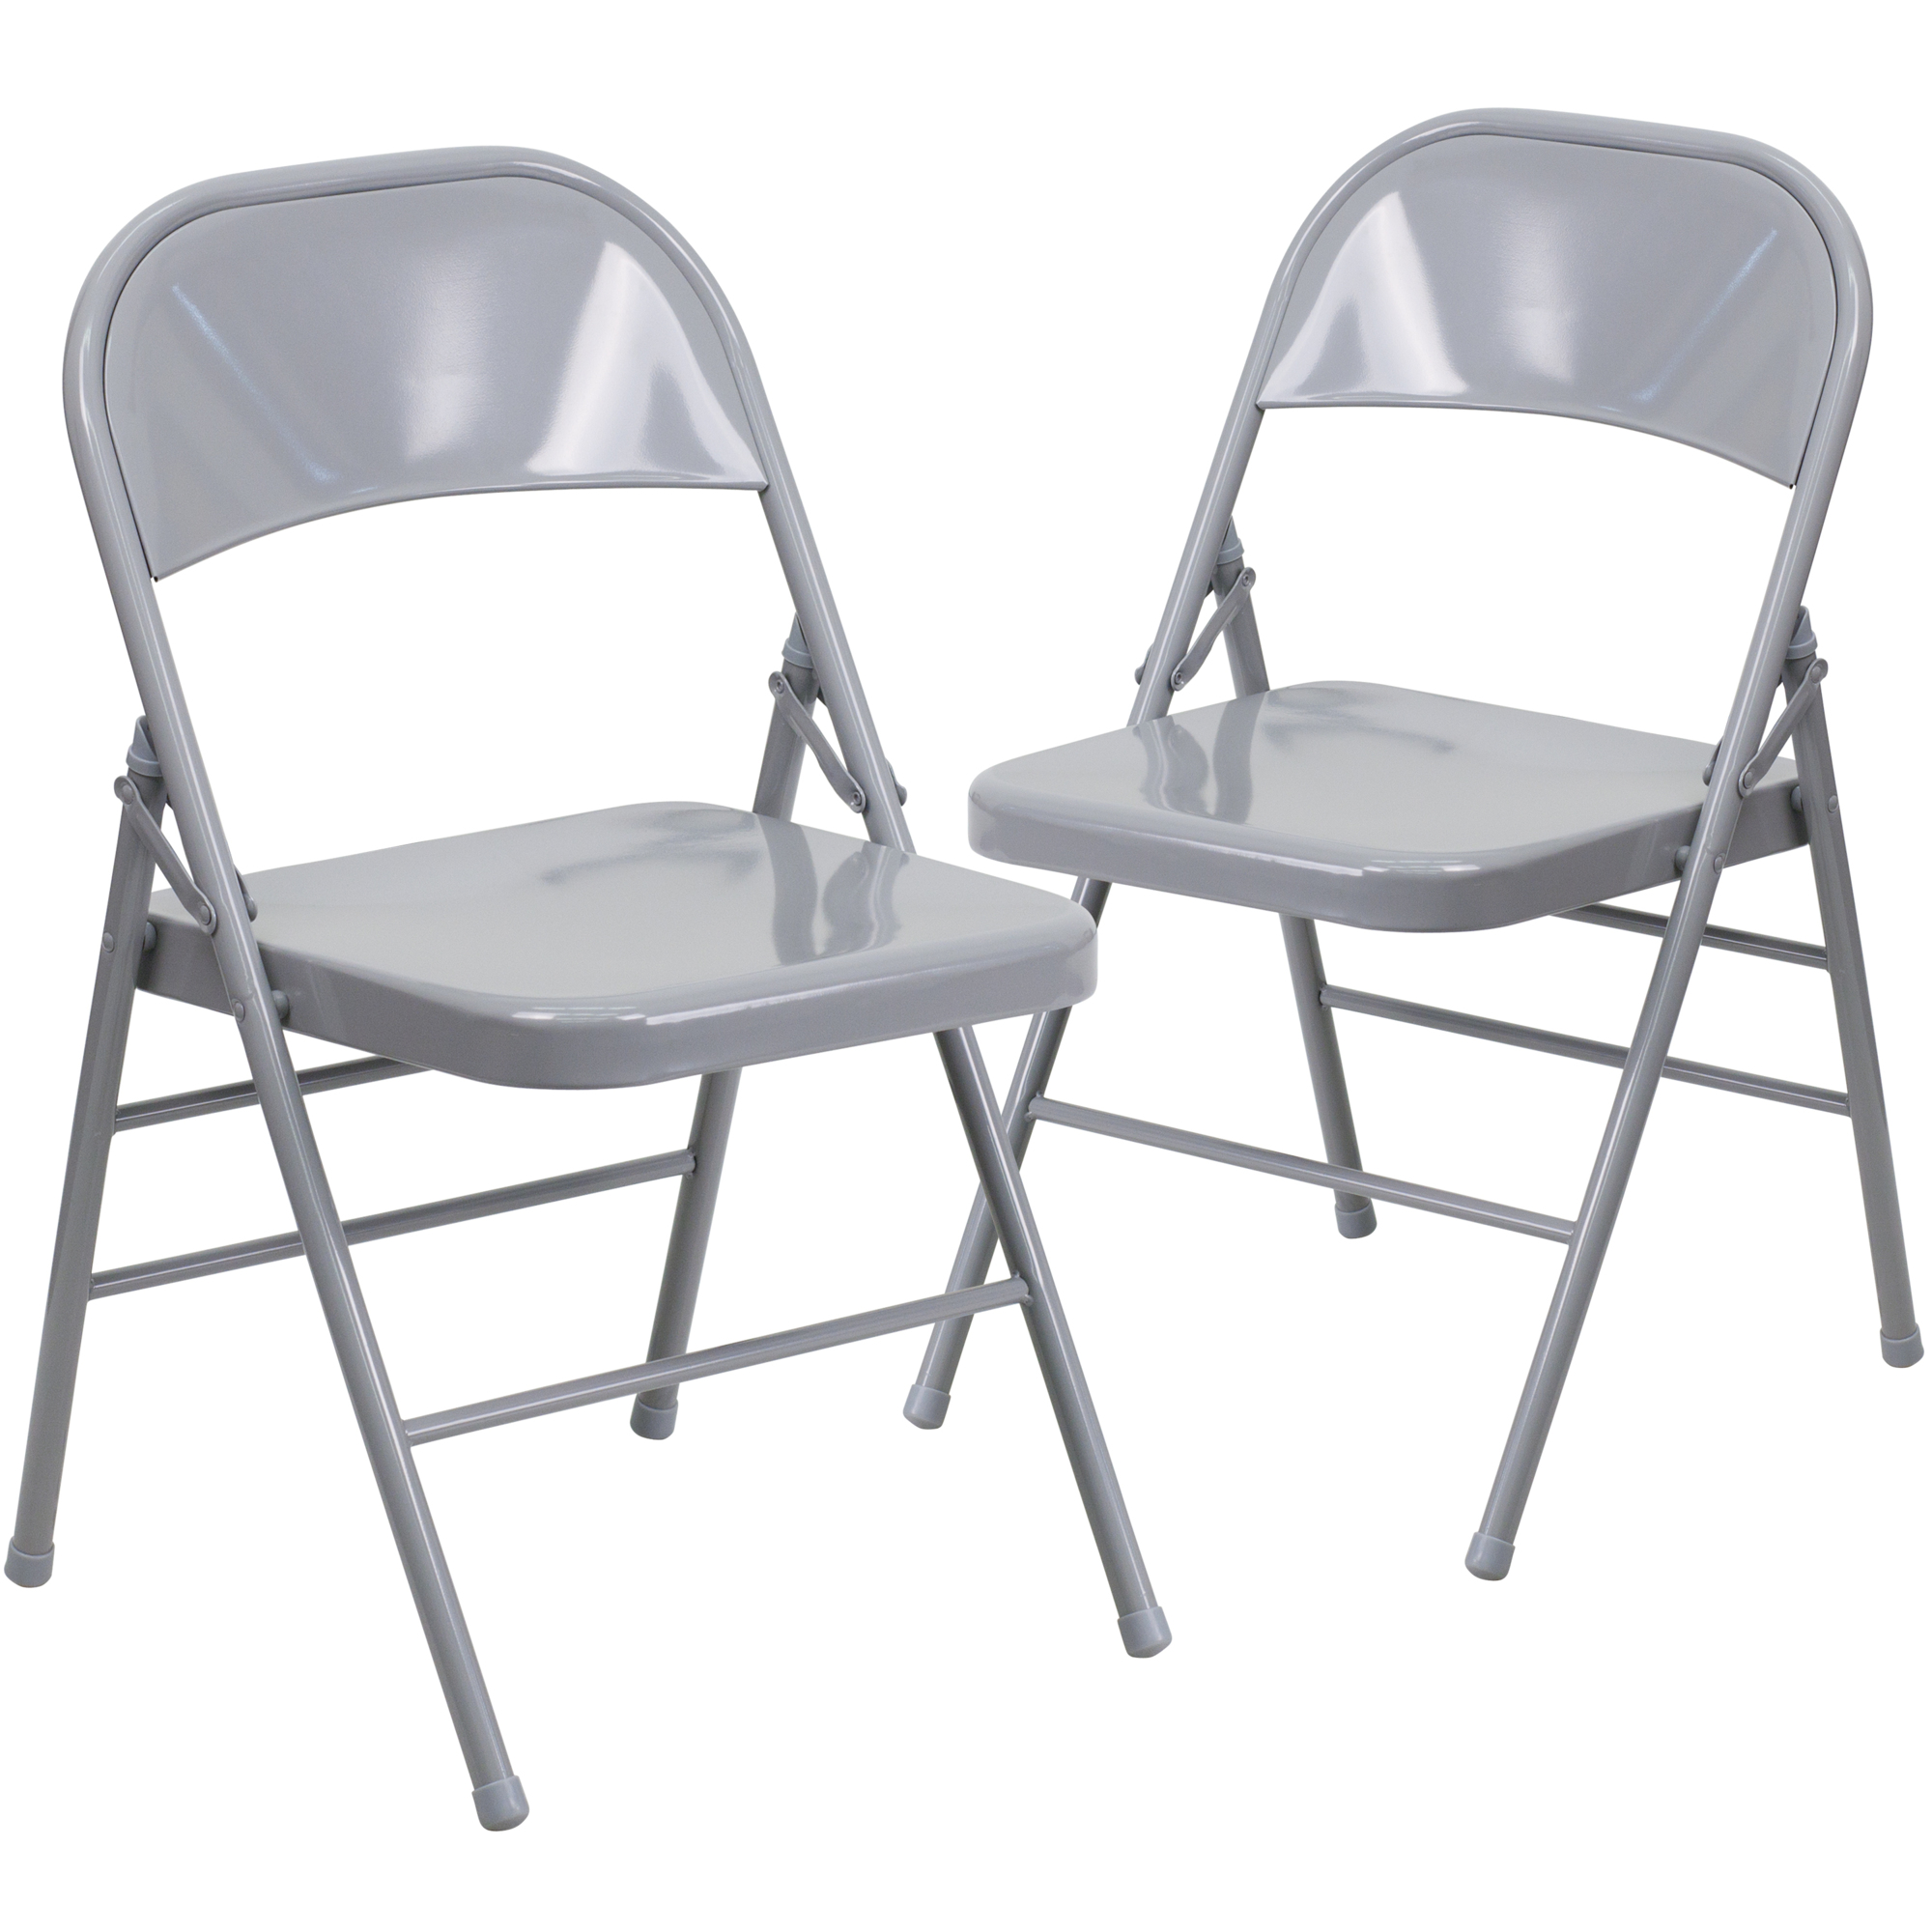 Flash Furniture, Triple Braced Double Hinged Gray Folding Chair, Primary Color Gray, Included (qty.) 2, Model 2HF3MC309ASGY